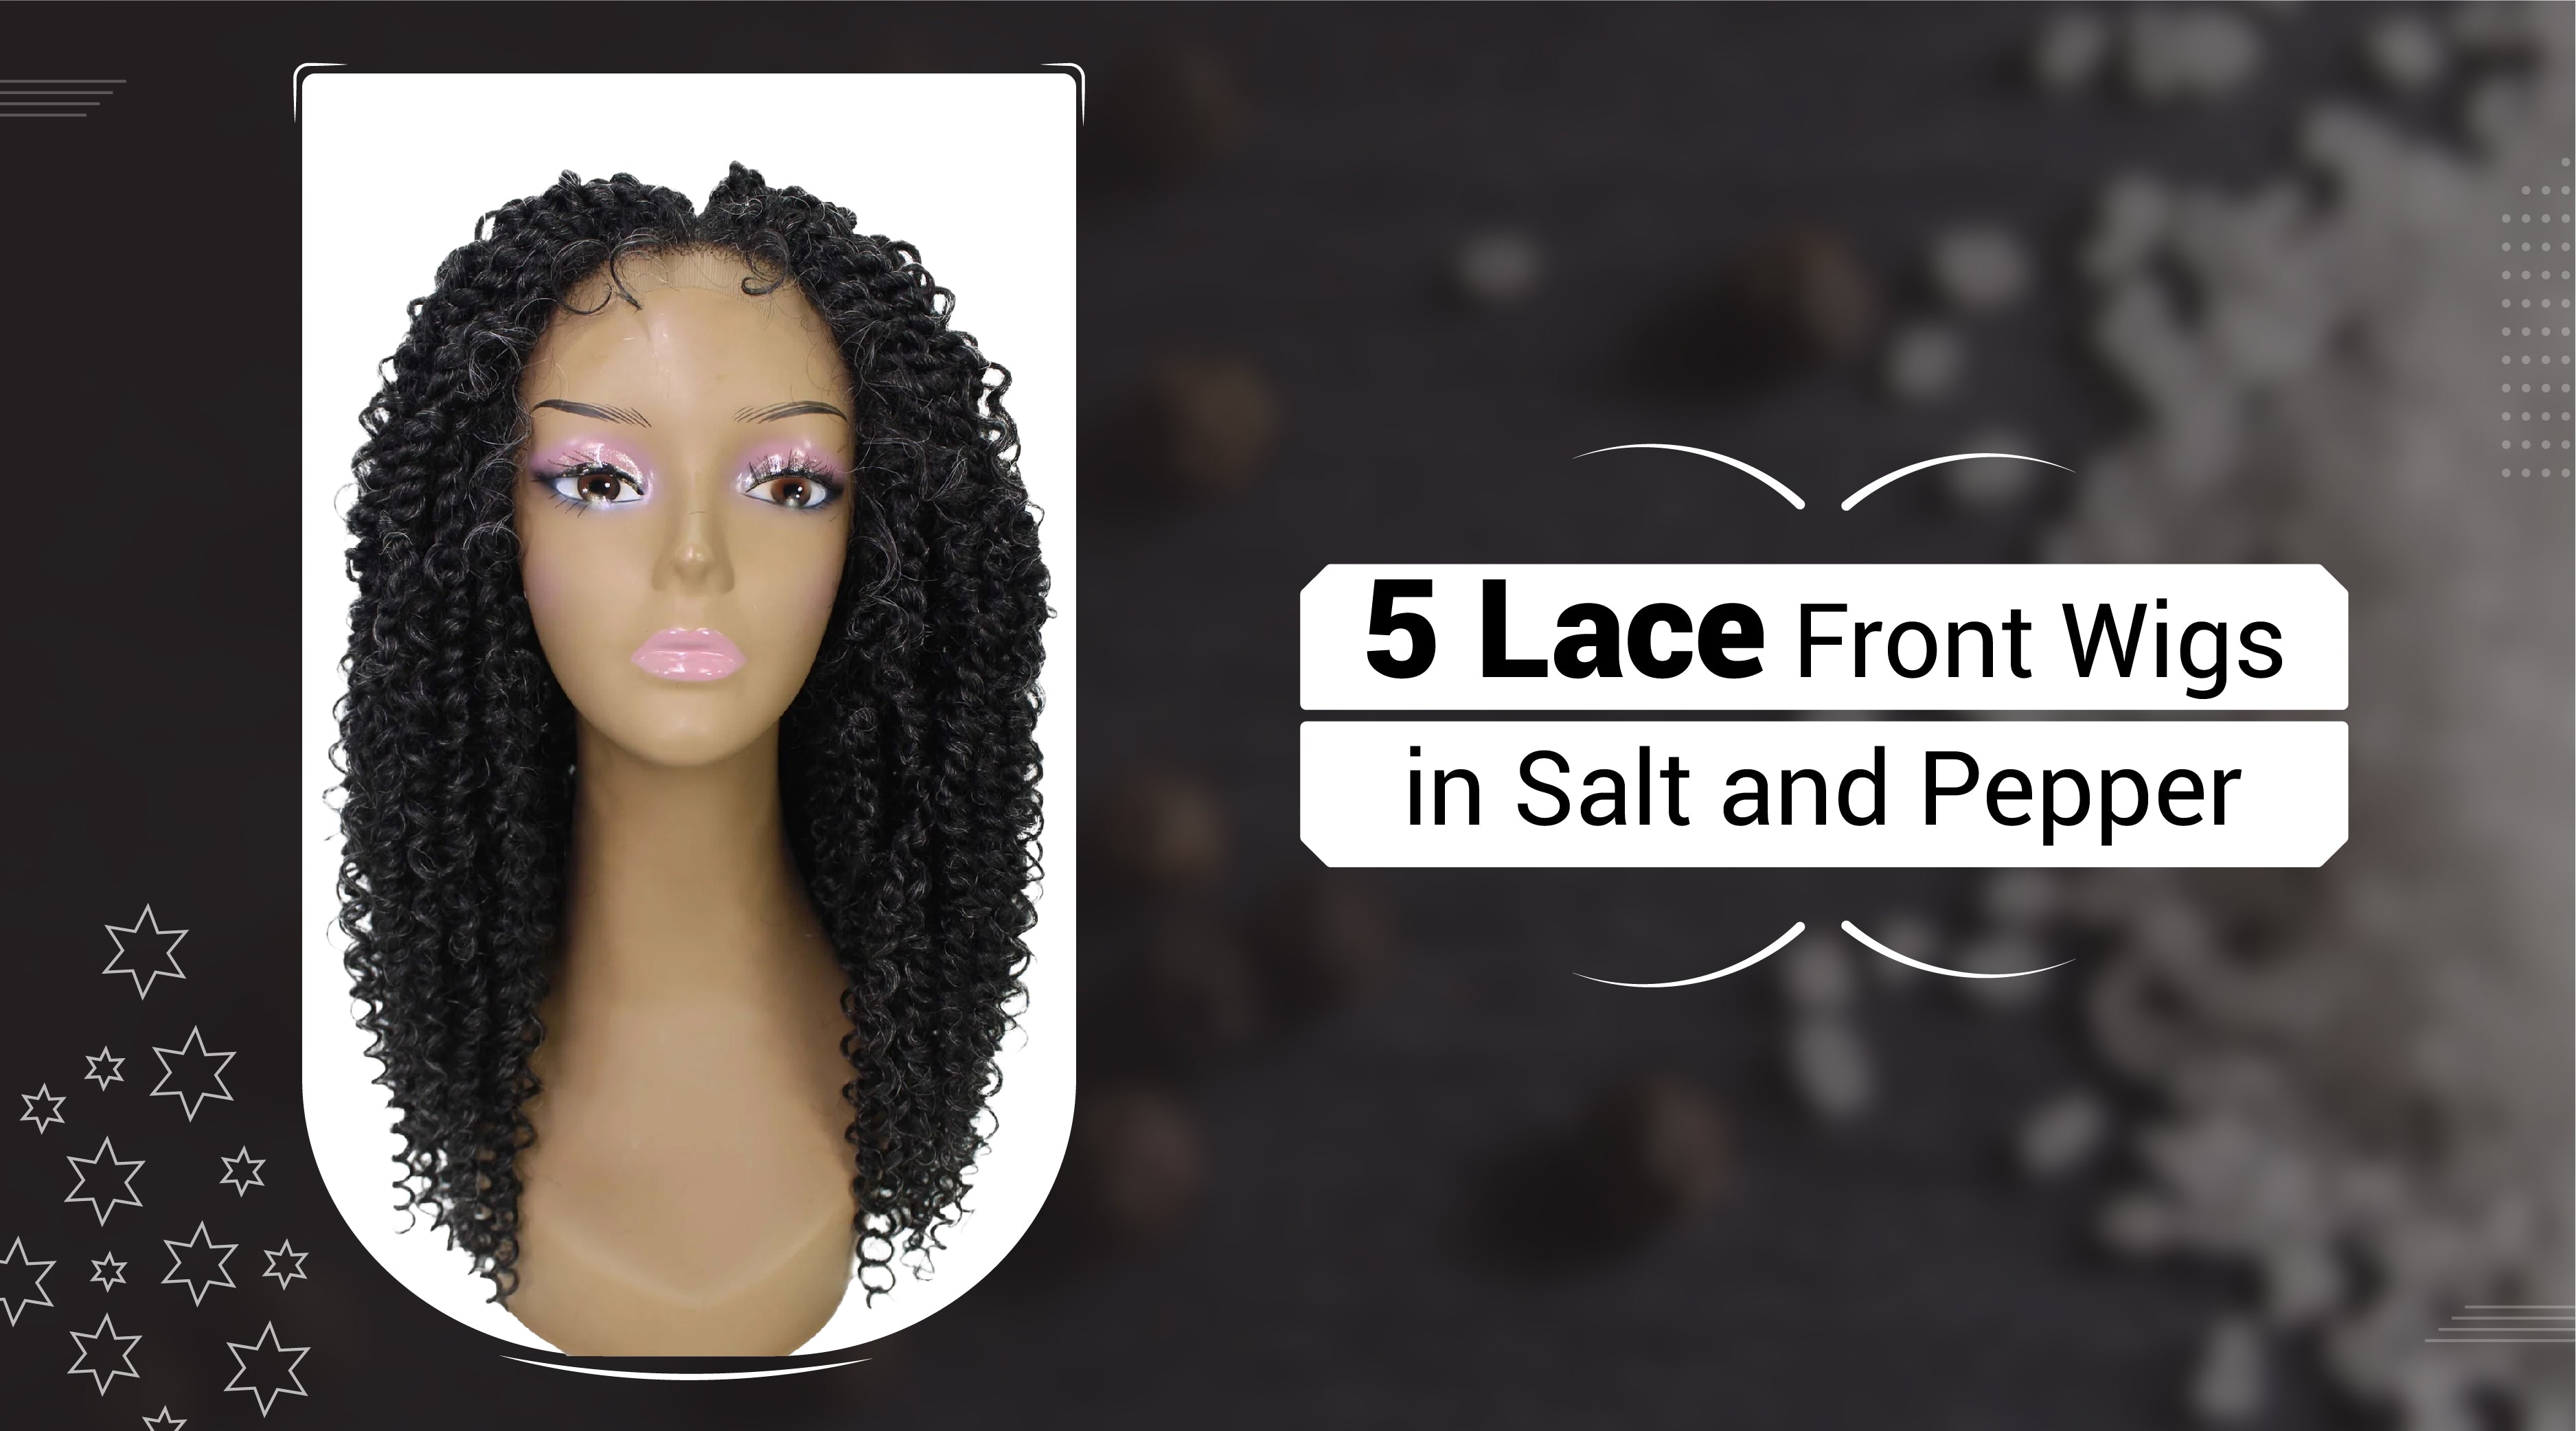 5 Lace Front Wigs in Salt and Pepper